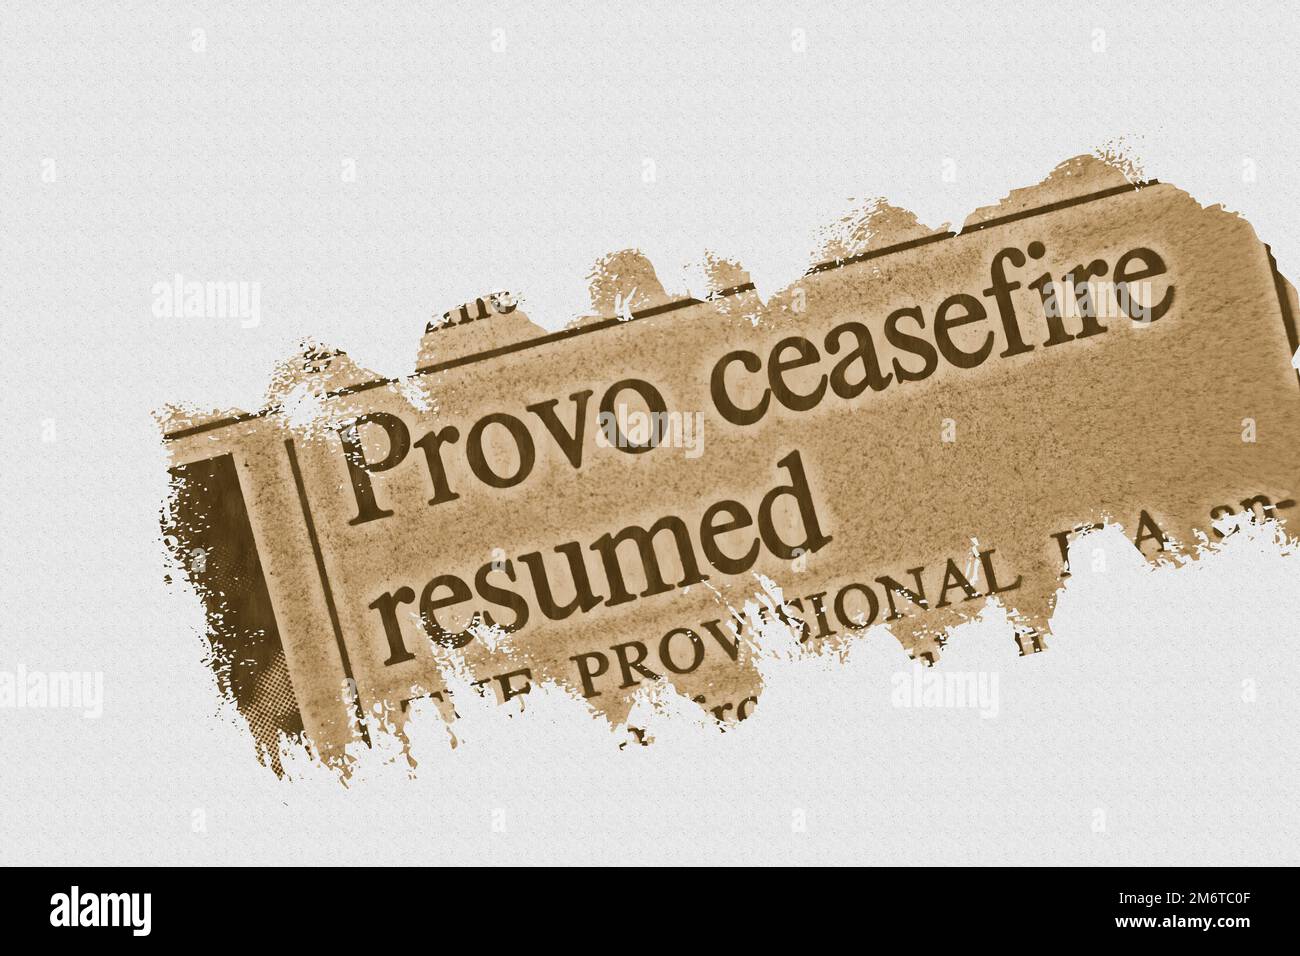 Provo ceasefire resumed - news story from 1975 newspaper headline article title with overlay highlight Stock Photo